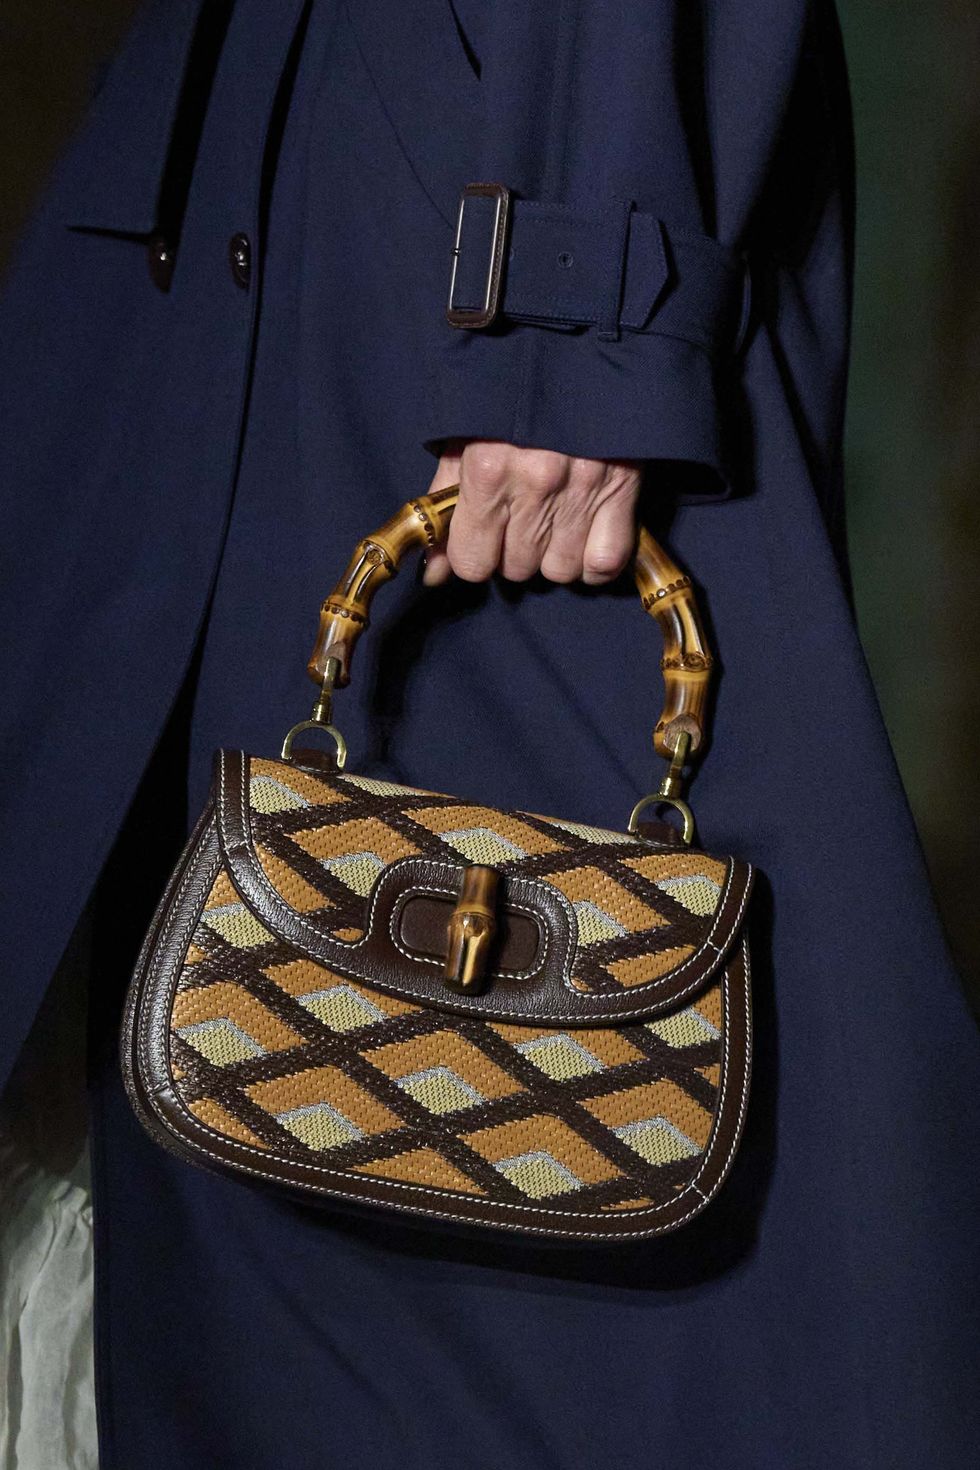 Gucci Bags, The Most Iconic Handbags Of All Time, British Vogue